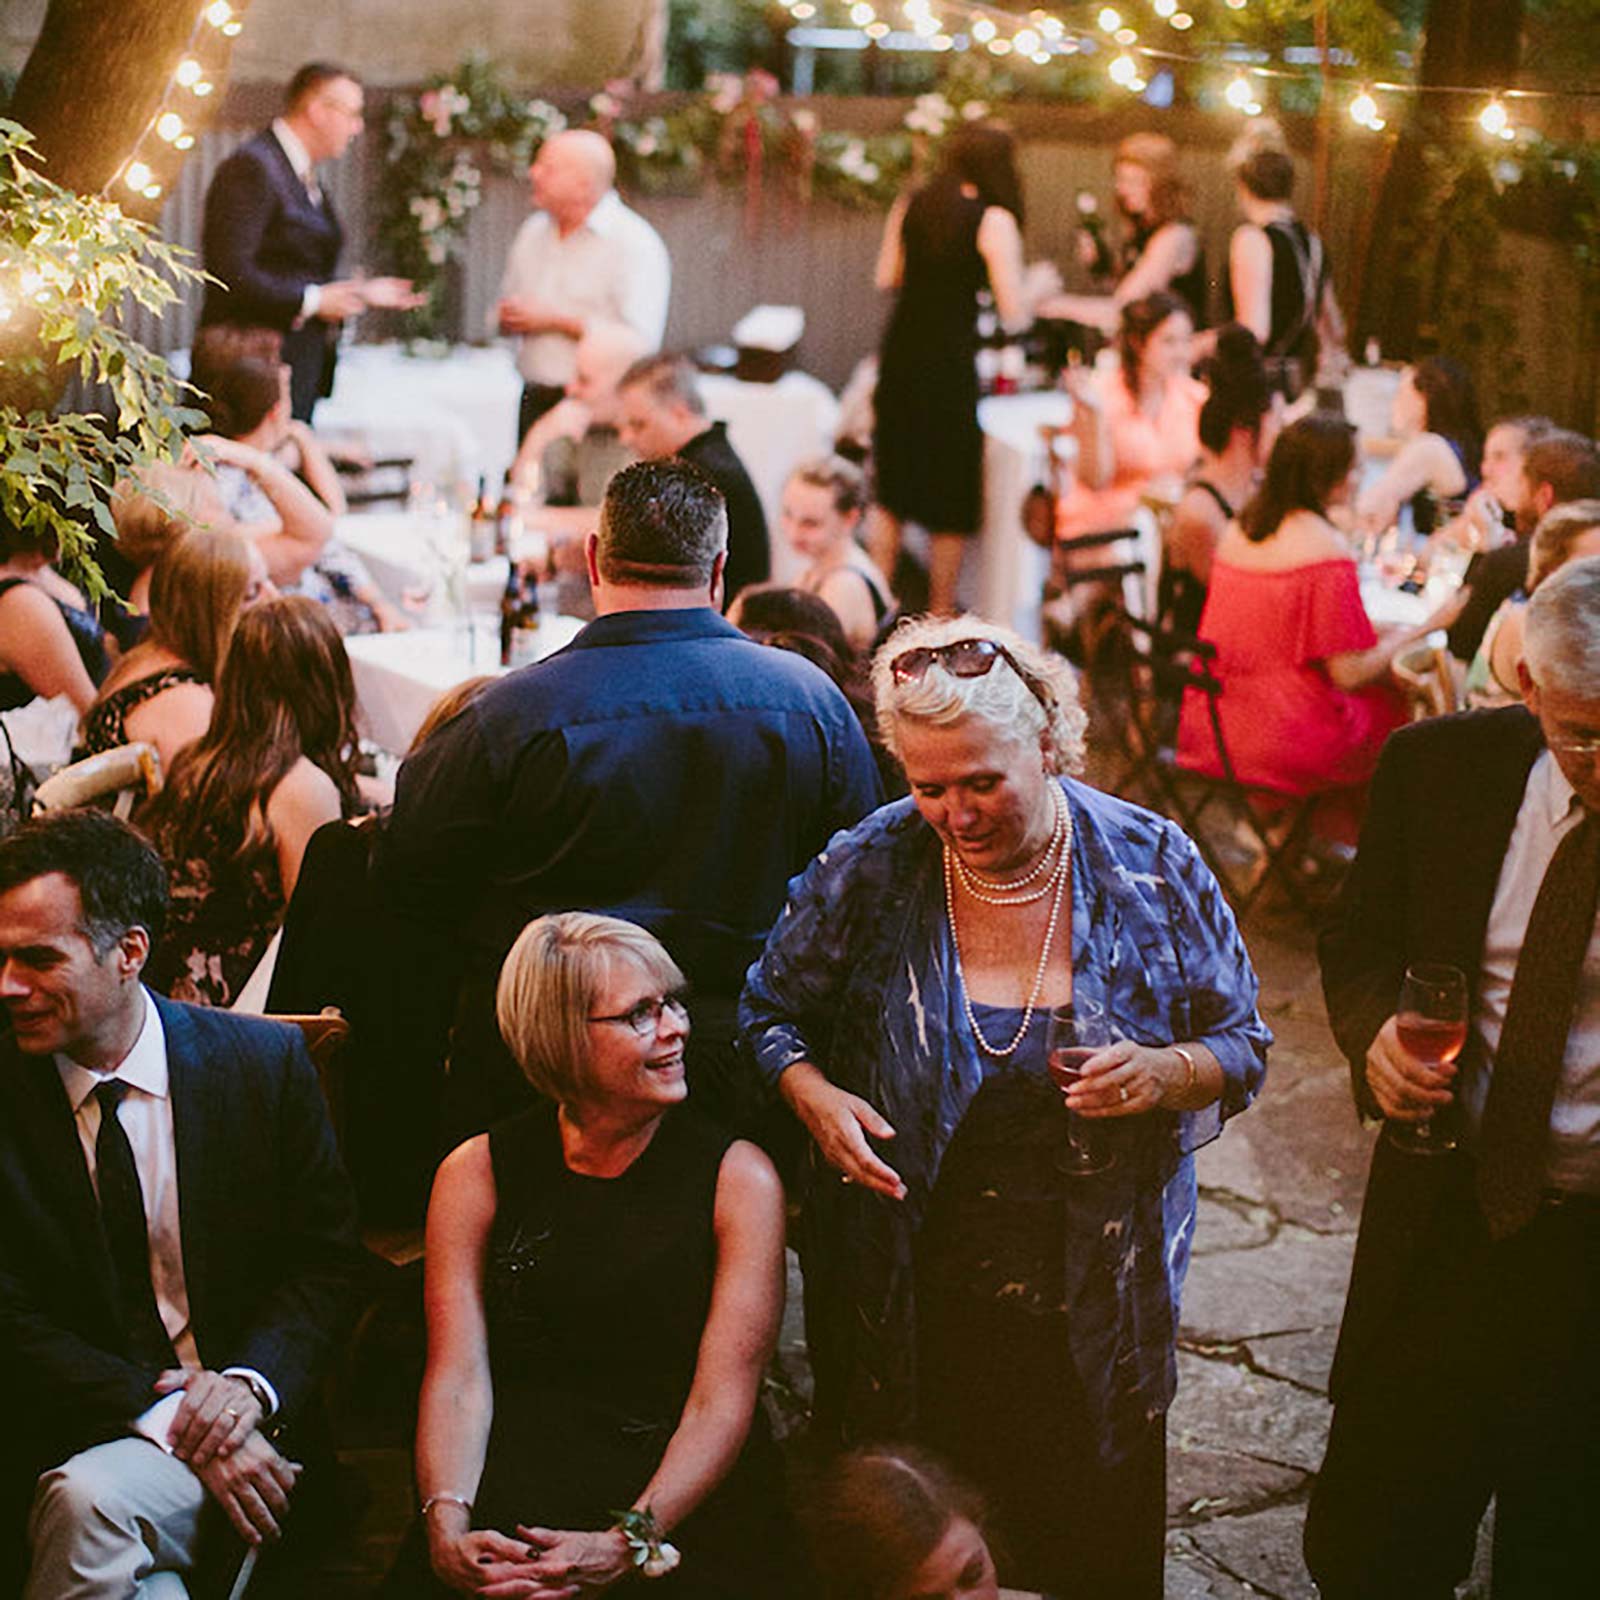 Guests during Cocktail at an Intimate Brooklyn Wedding Venue.